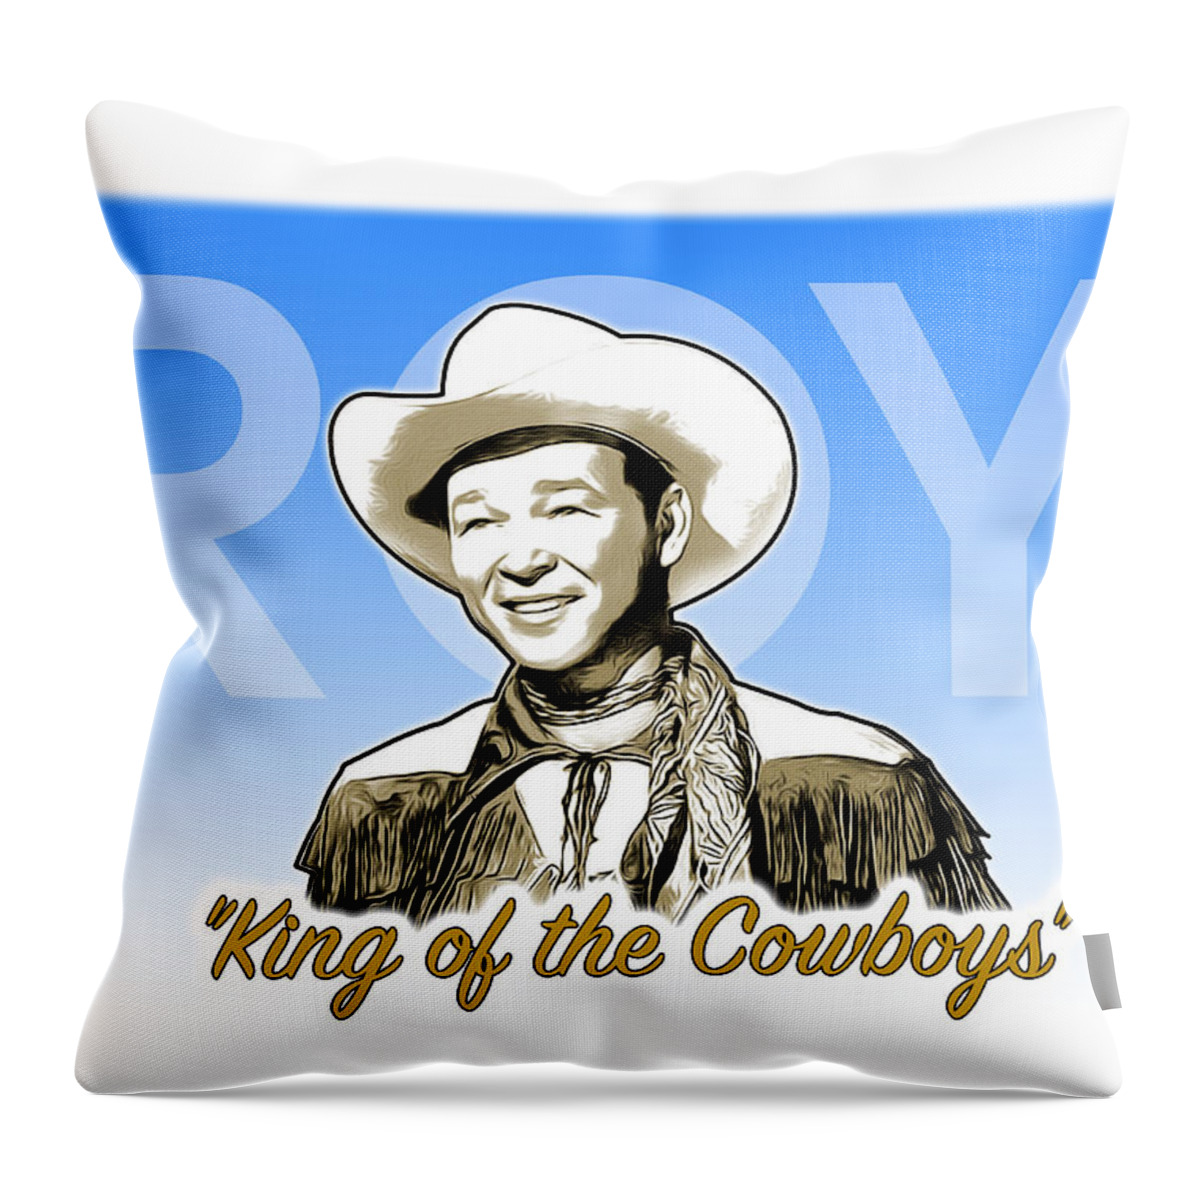 Roy Throw Pillow featuring the digital art King of the Cowboys by Greg Joens